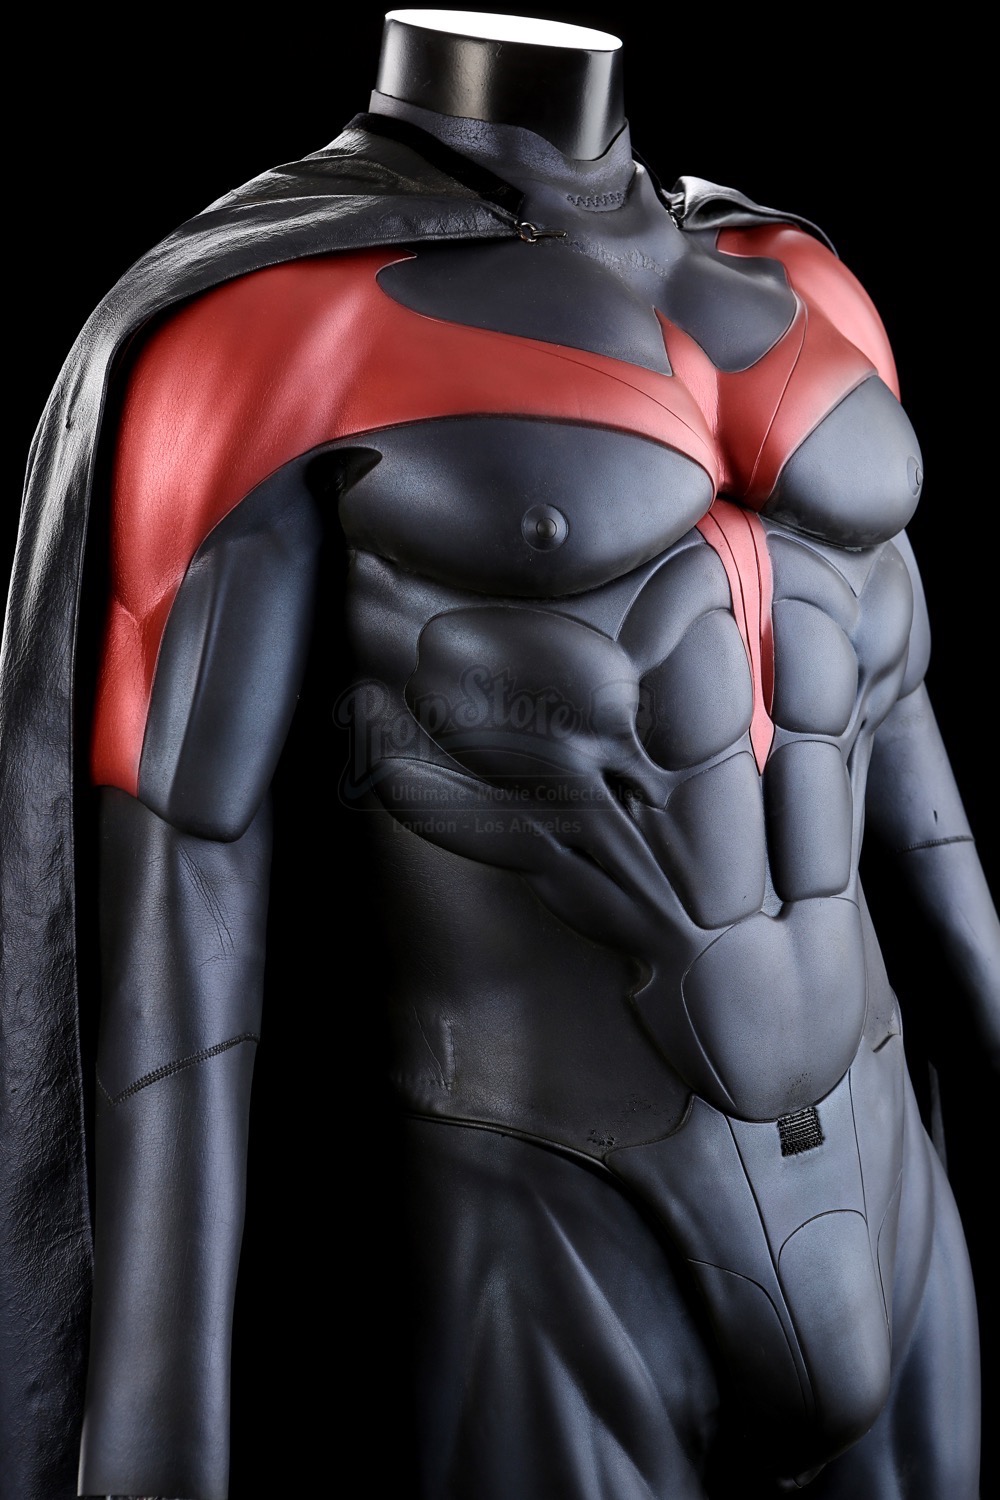 Batman And Robin 1997 Robins Chris Odonnell Bodysuit And Cape Current Price £5500 3079